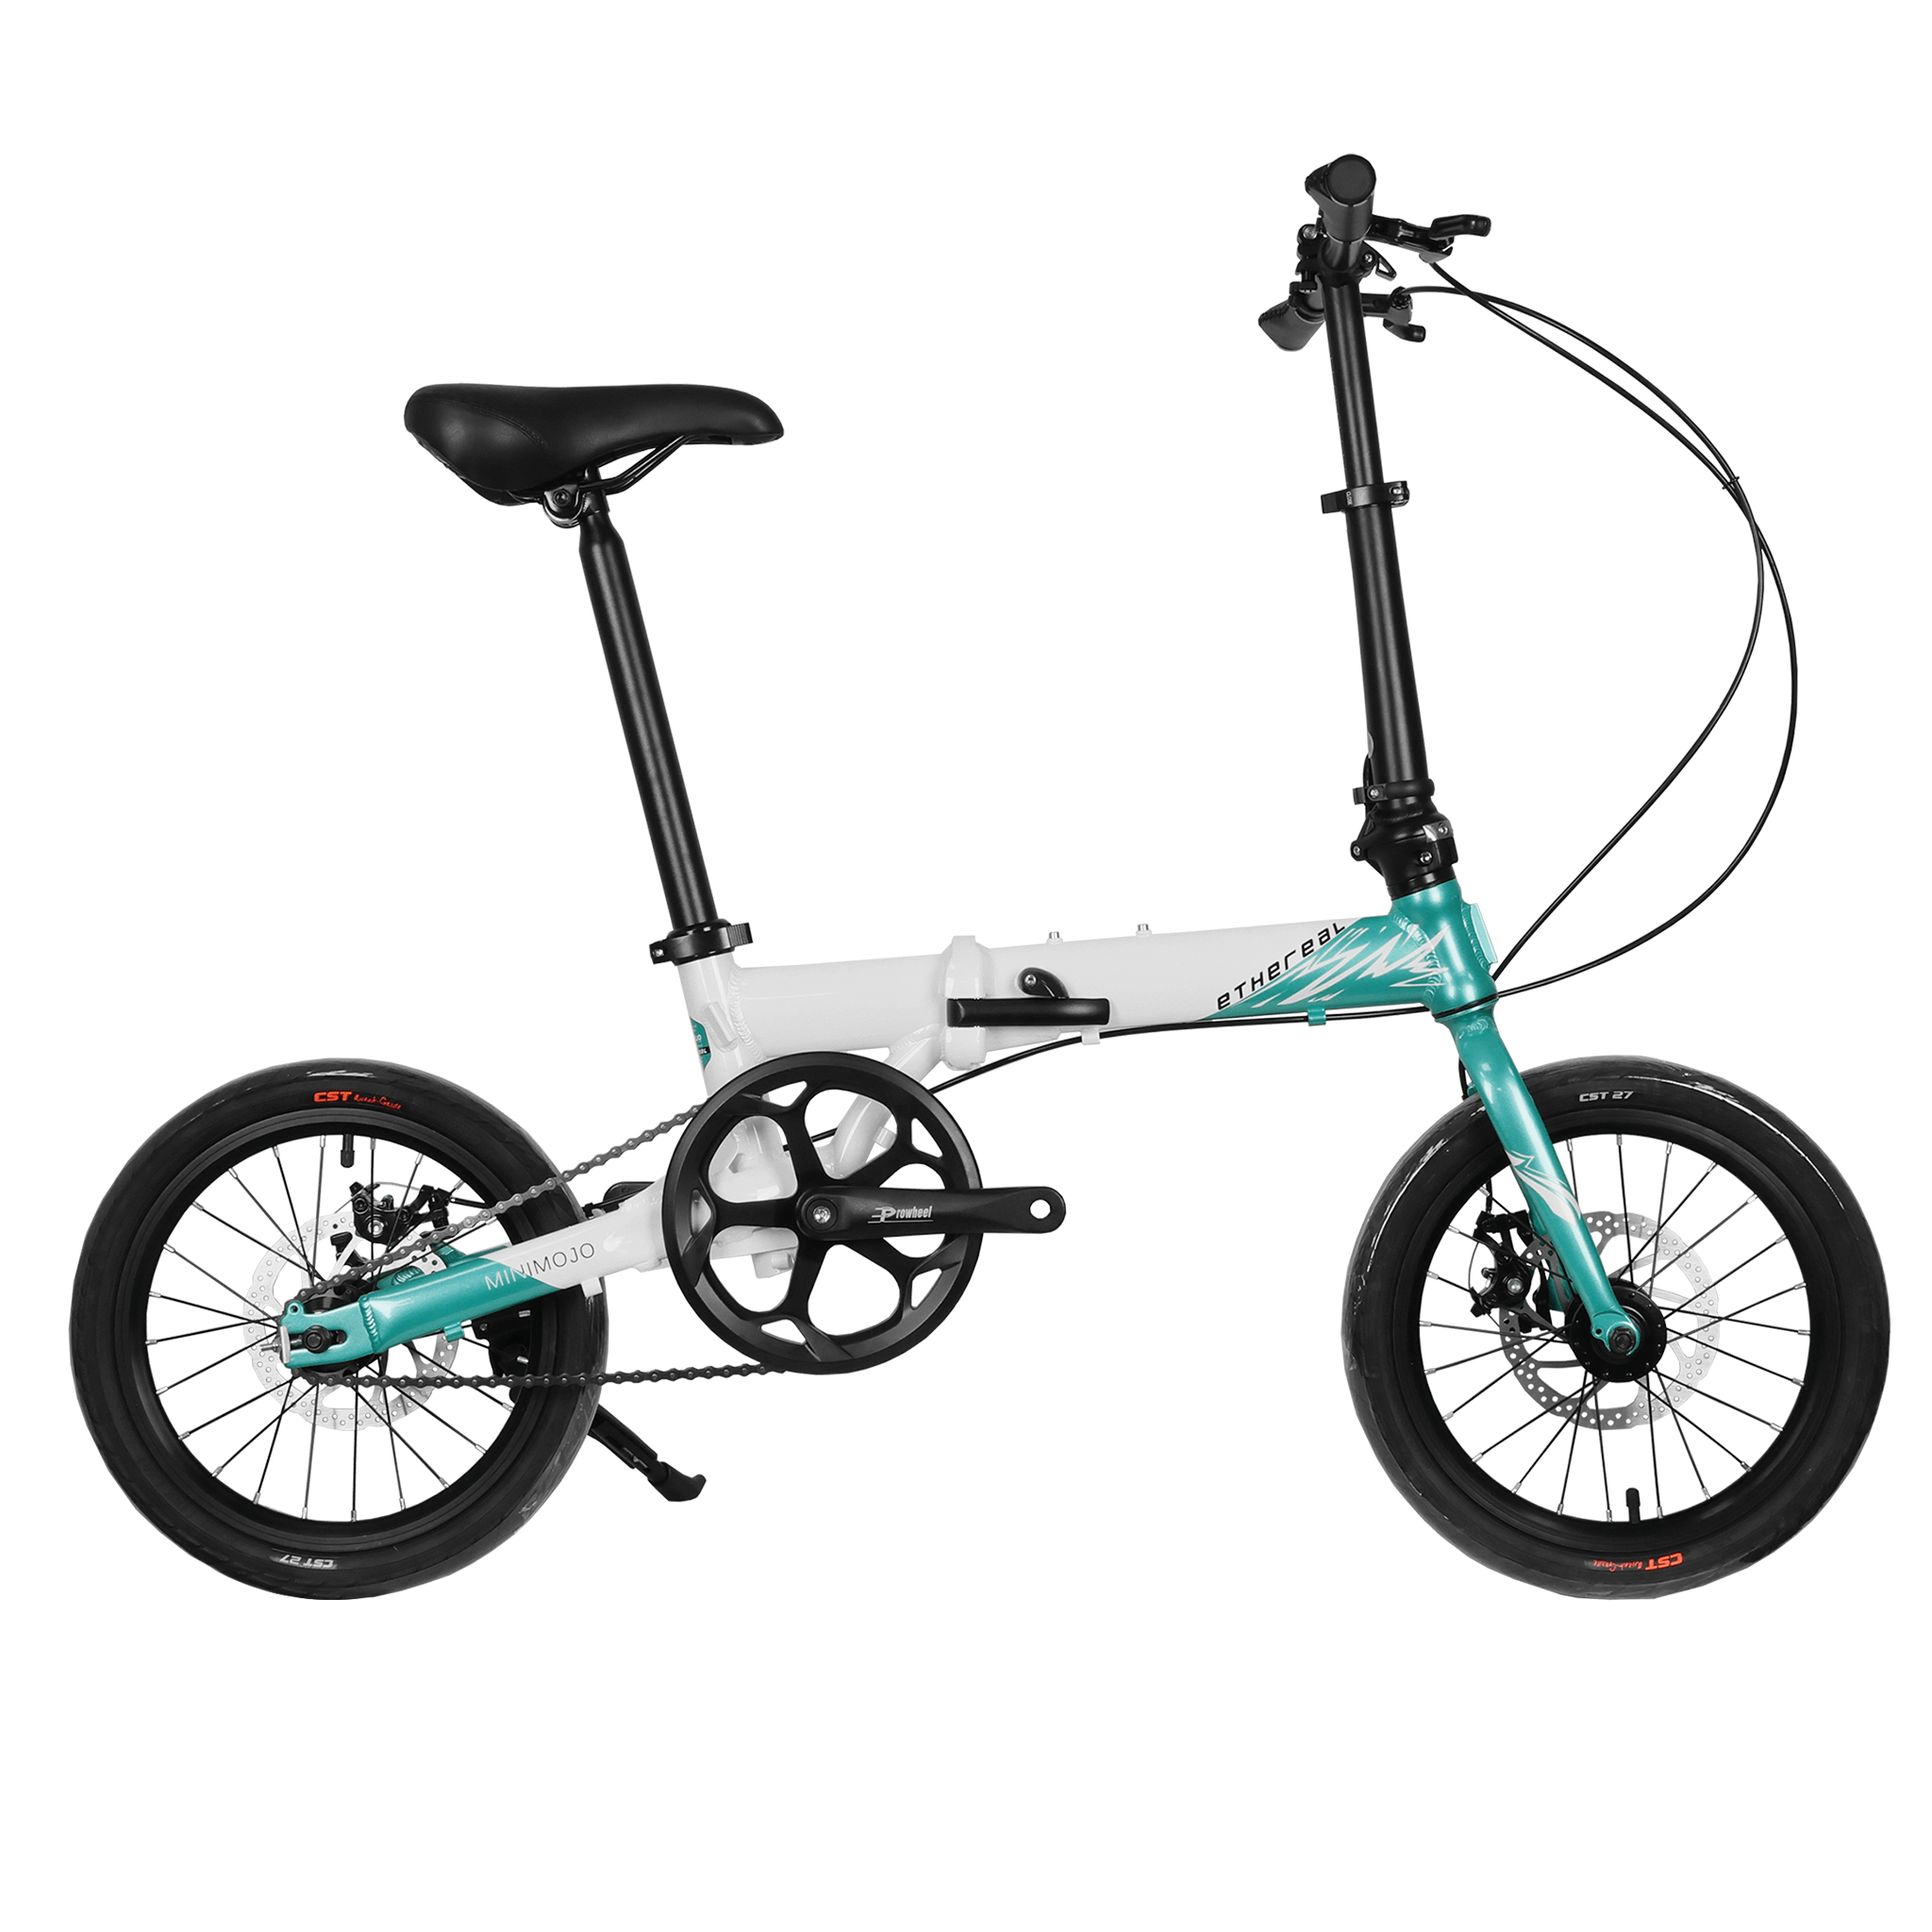 Minimojo Foldable Bicycle for Kids, Juniors and Ladies - Compact & Adjustable